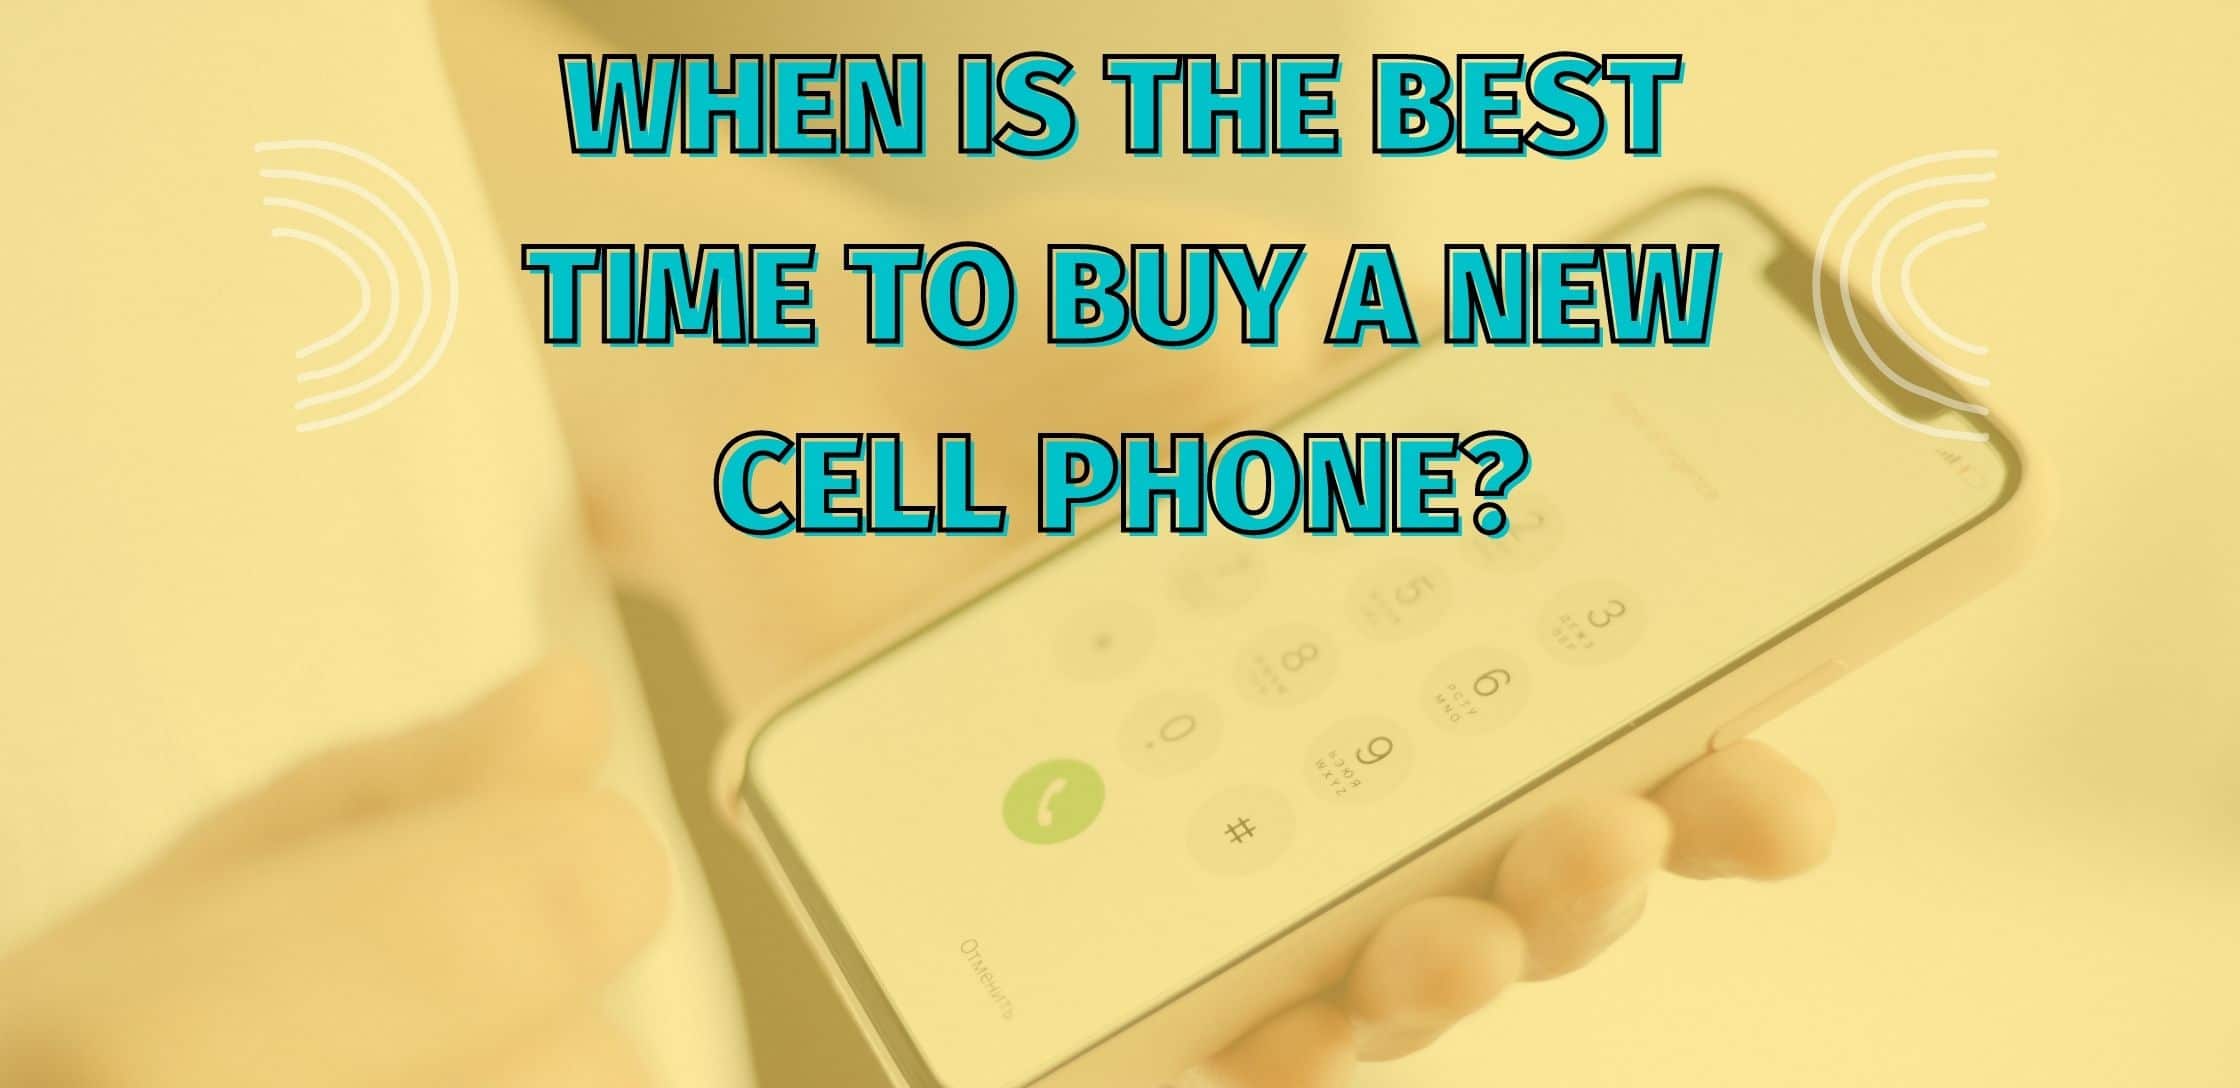 When Is The Best Time To Buy A New Cell Phone?